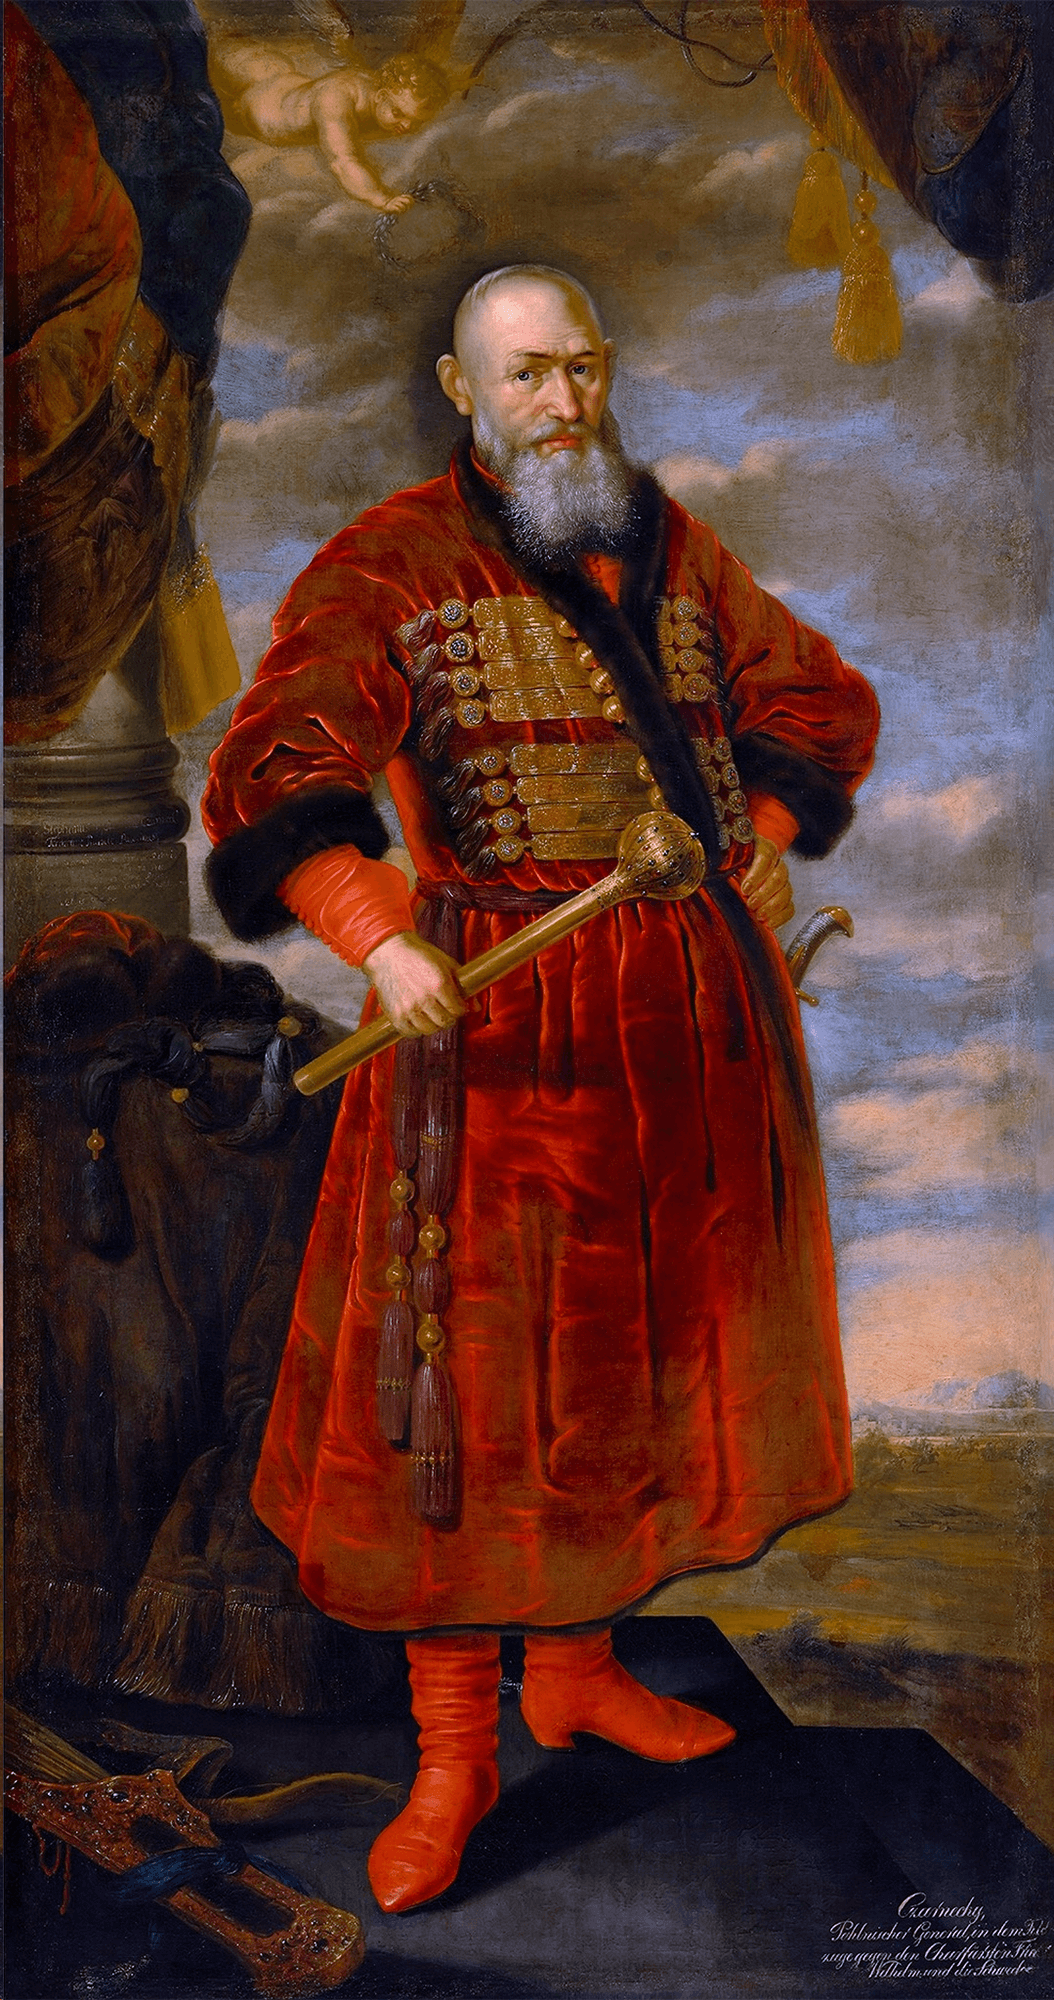 Portrait of Stefan Czarniecki, A. Lesser, according to B. Matthissen, mid-19th century, courtesy of the National Museum in Warsaw